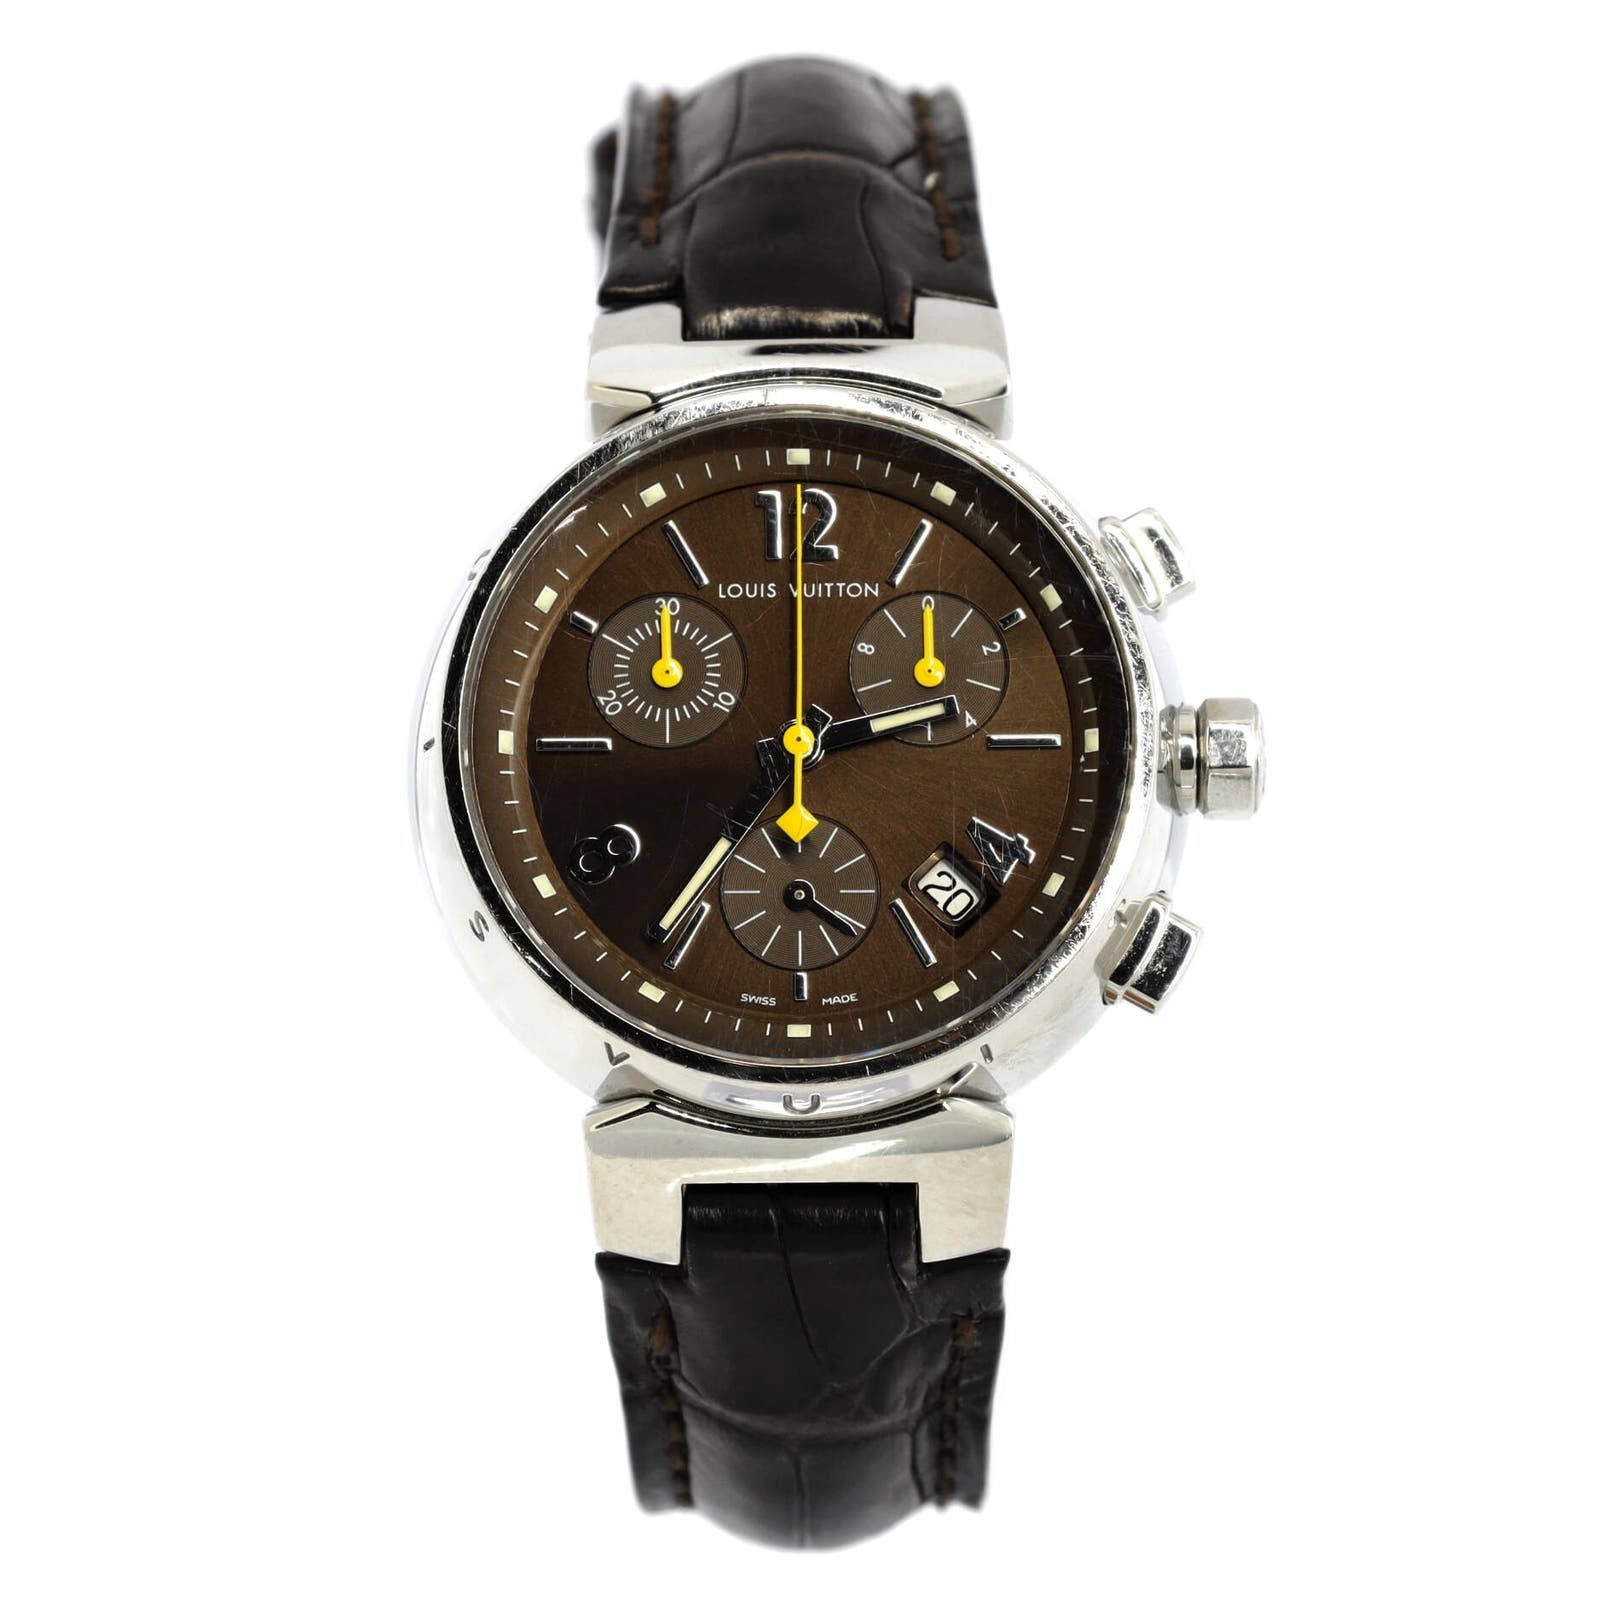 image of Louis Vuitton Tambour Chronograph Quartz Watch Stainless Steel in Brown, Women's